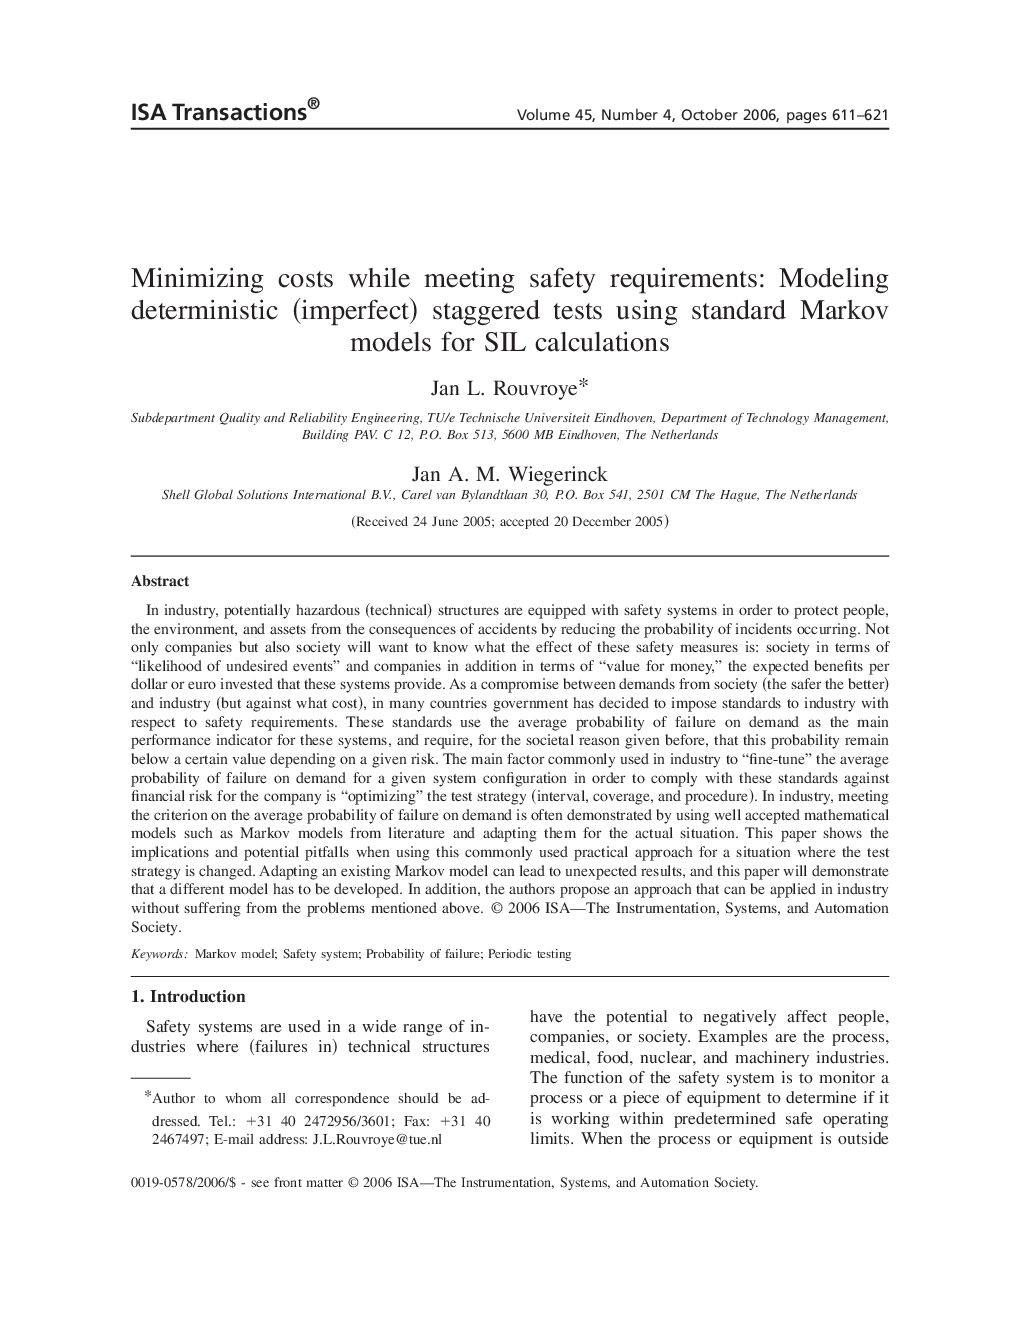 Minimizing costs while meeting safety requirements: Modeling deterministic (imperfect) staggered tests using standard Markov models for SIL calculations